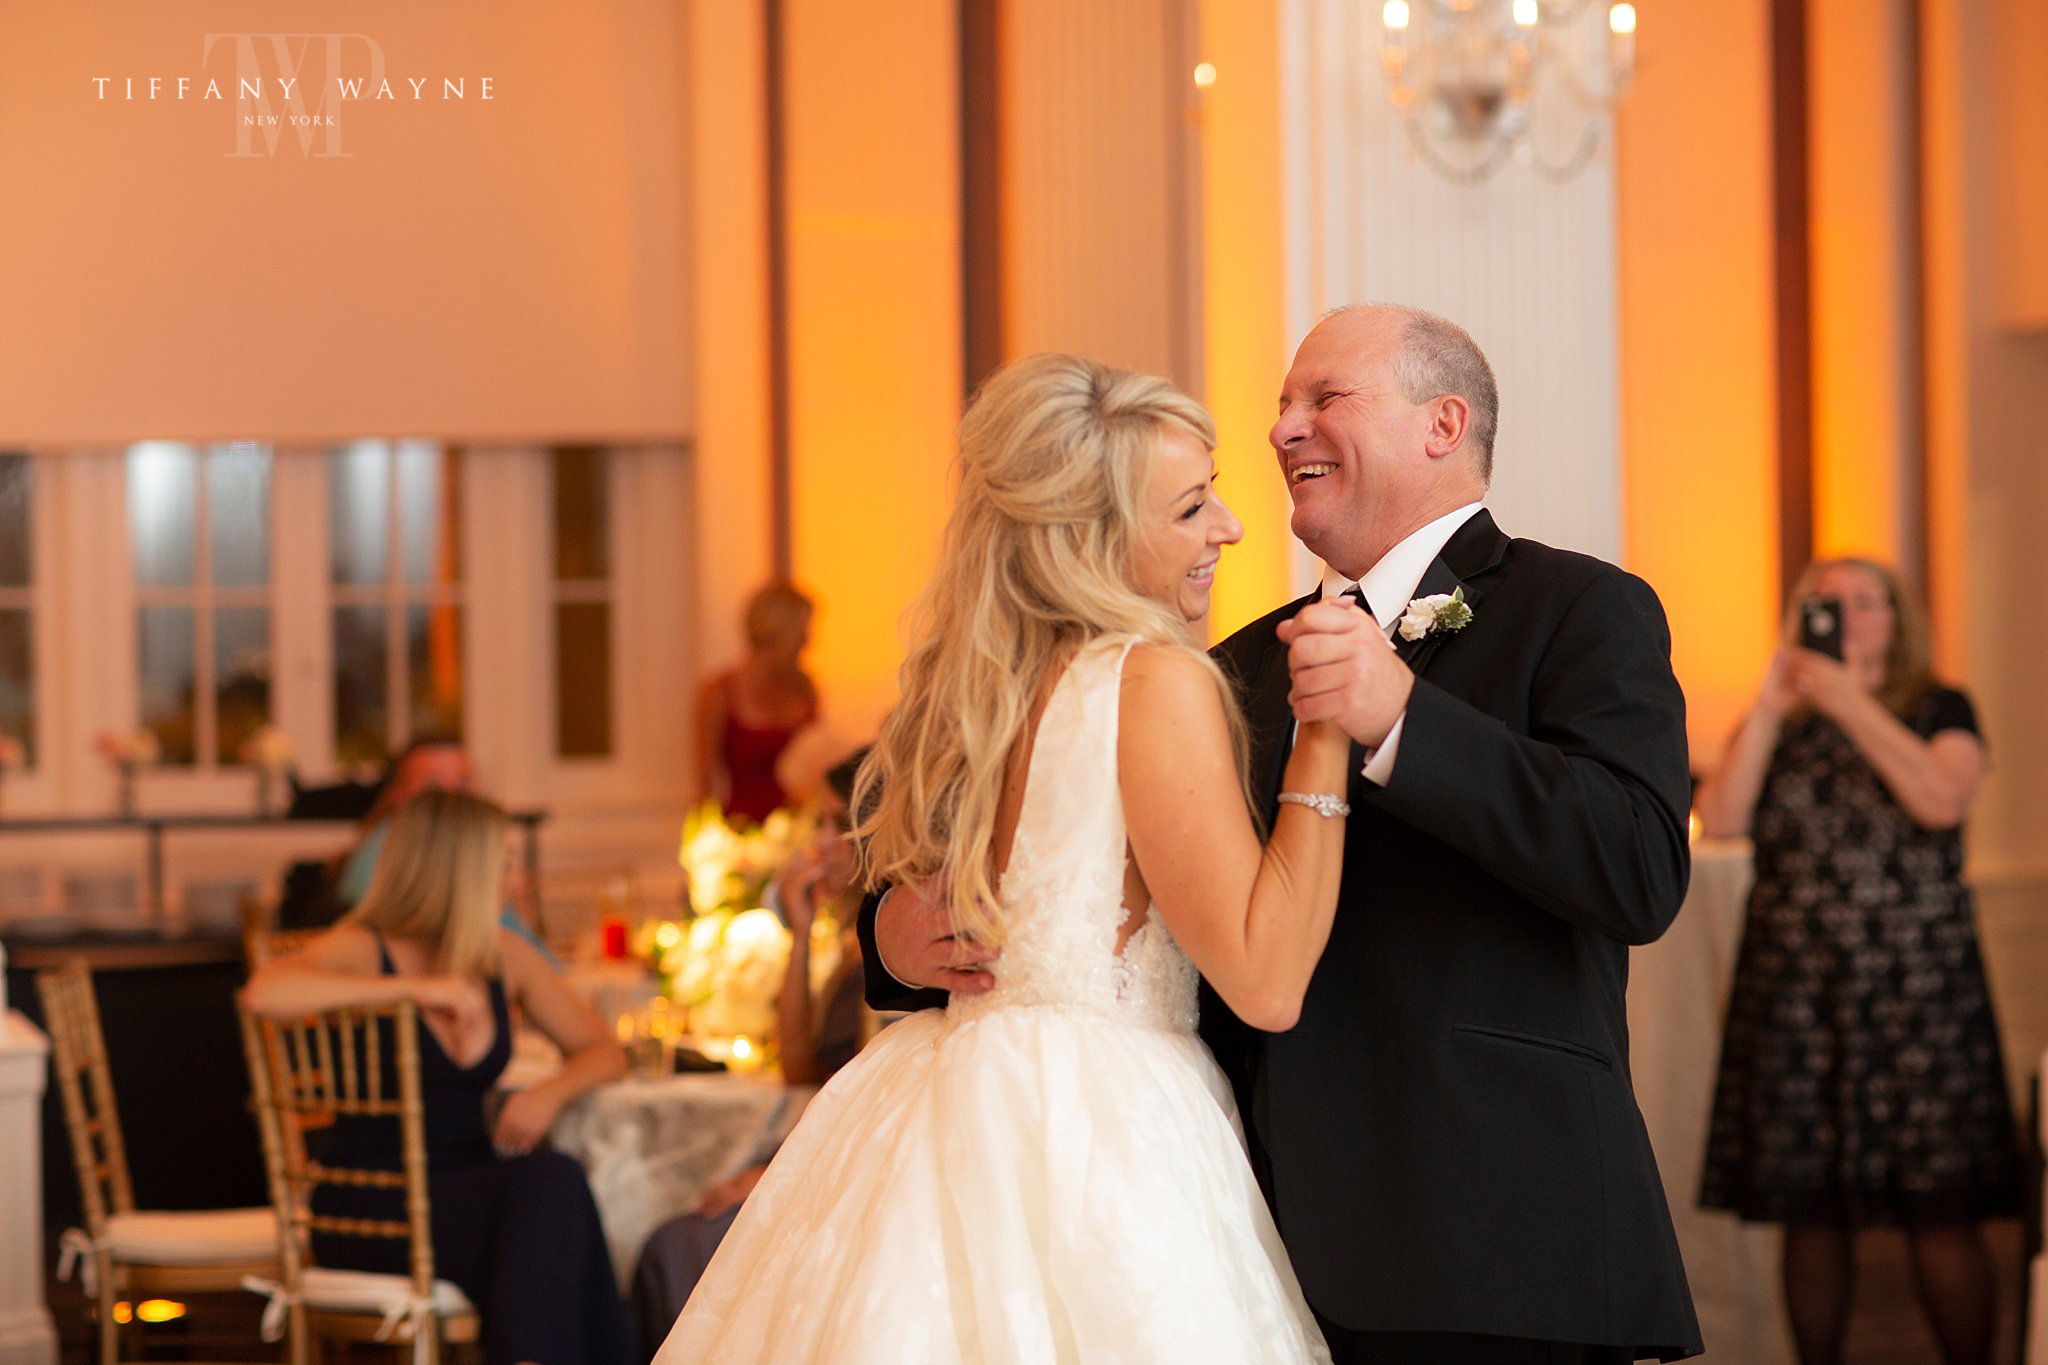 bride and father dance on wedding day photographed by Tiffany Wayne Photography